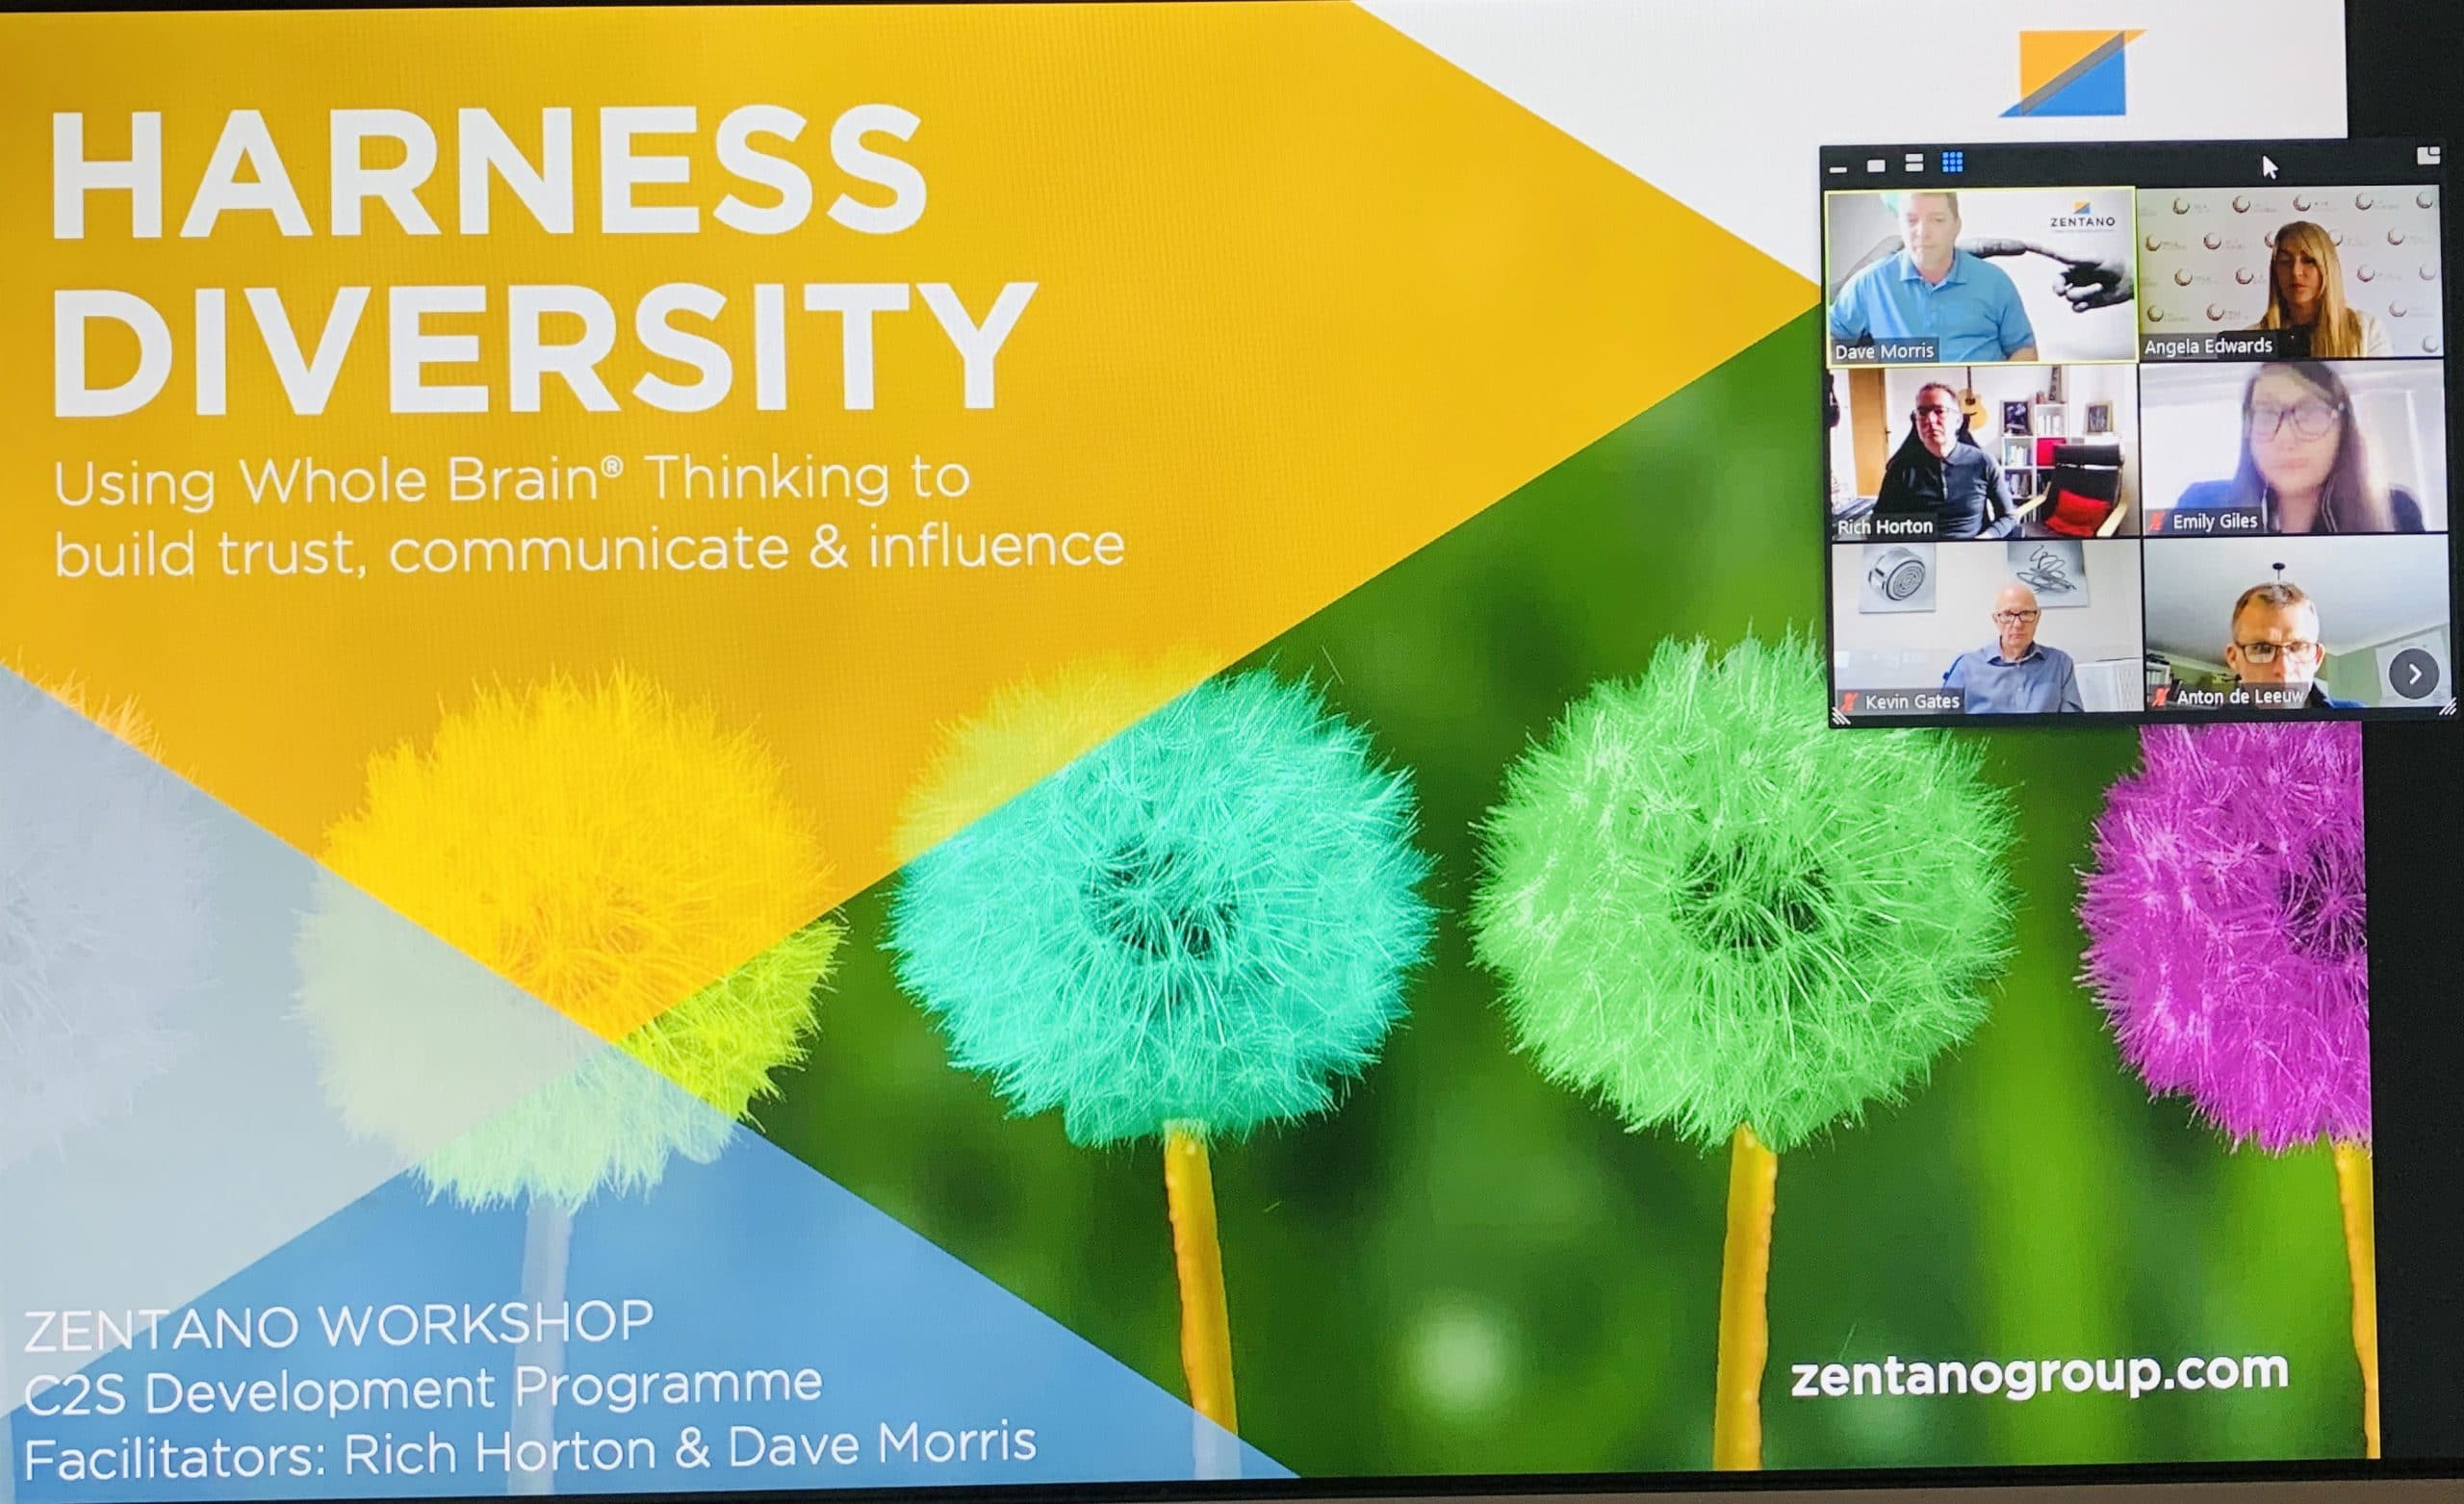 C2S Development Programme Launched with Zentano Looking at Whole Brain Thinking